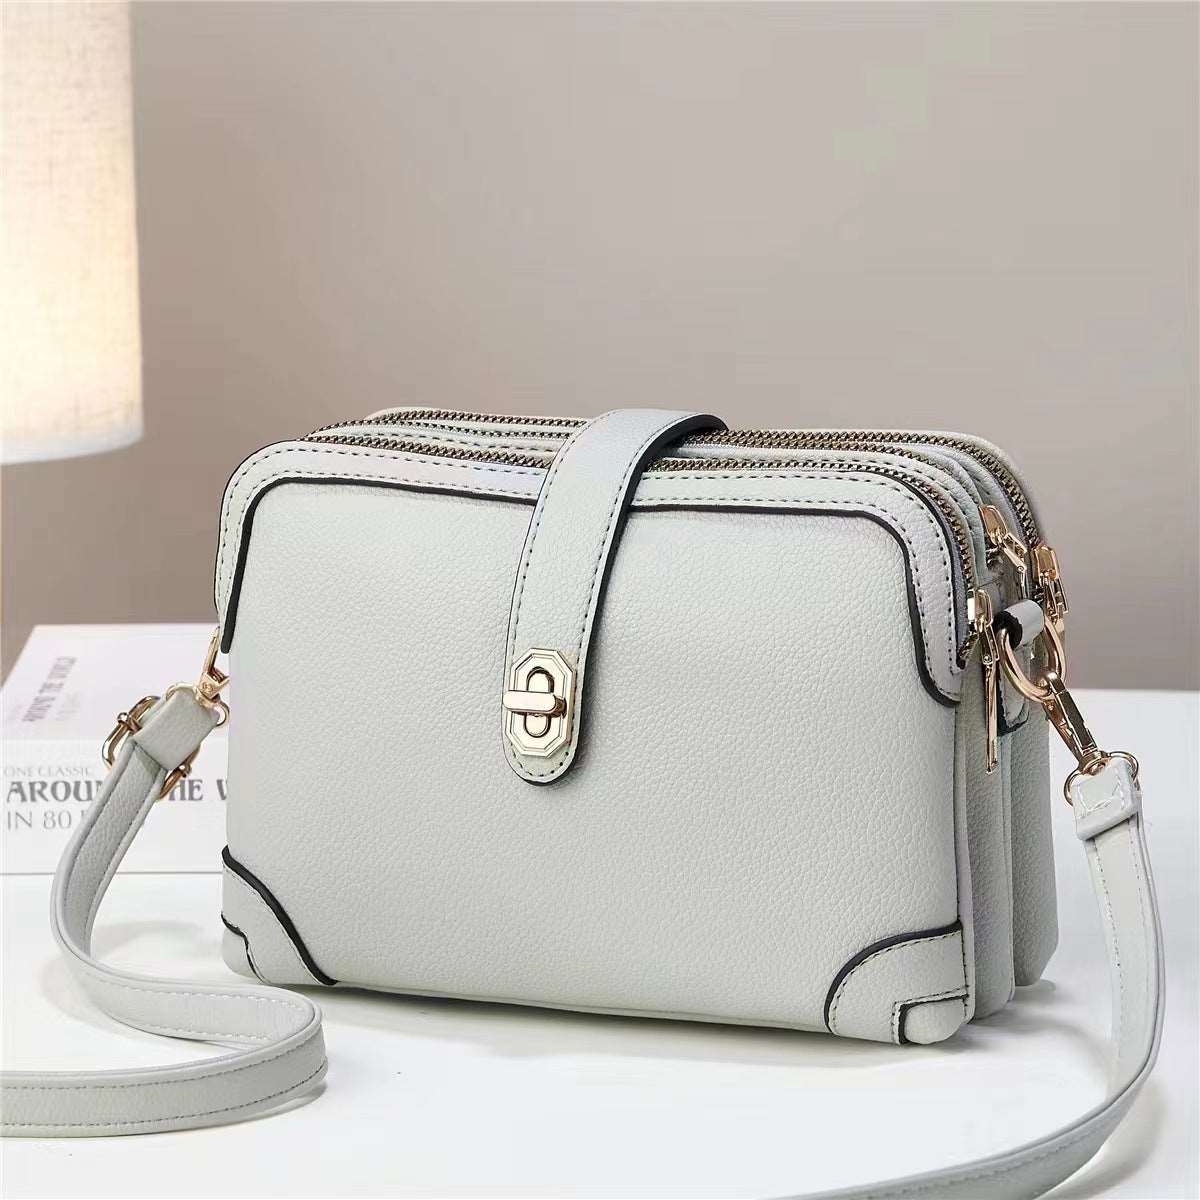 Women's Multi-functional Small Square Crossbody Bag - Classic Leather Bag